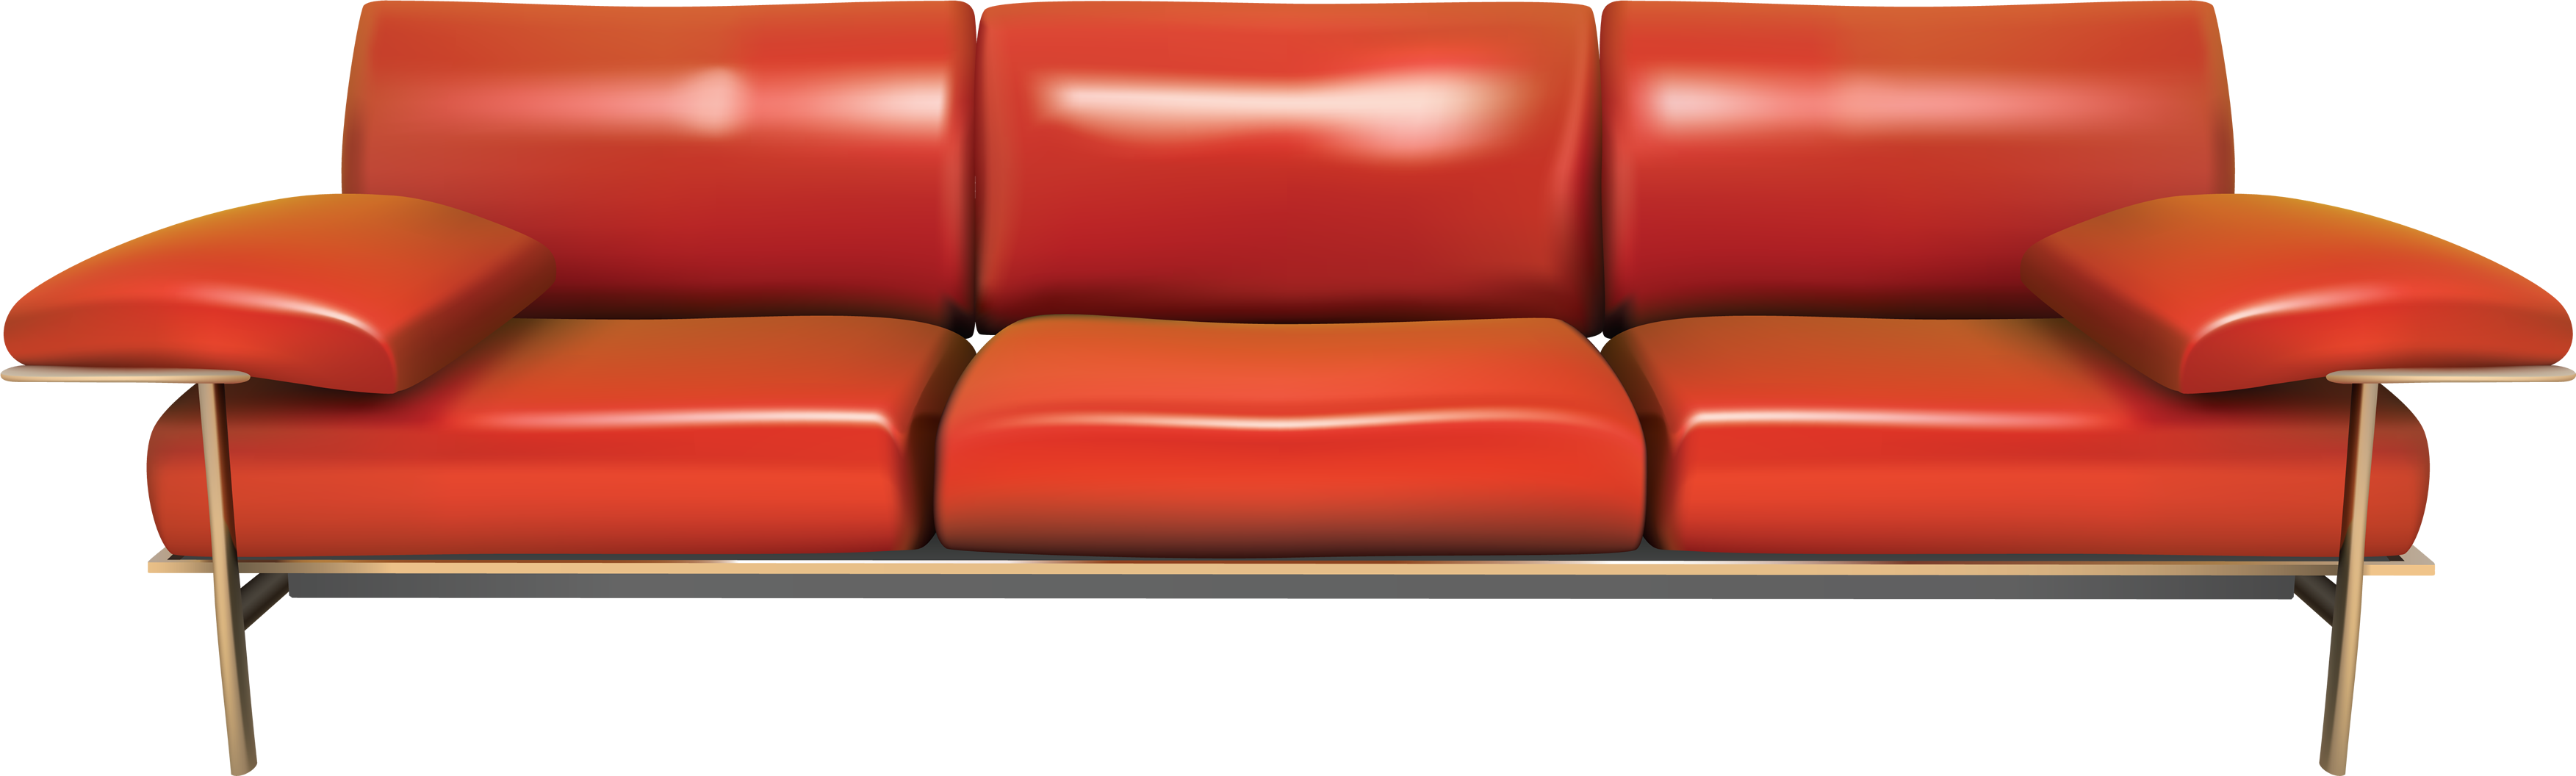 couch clipart red